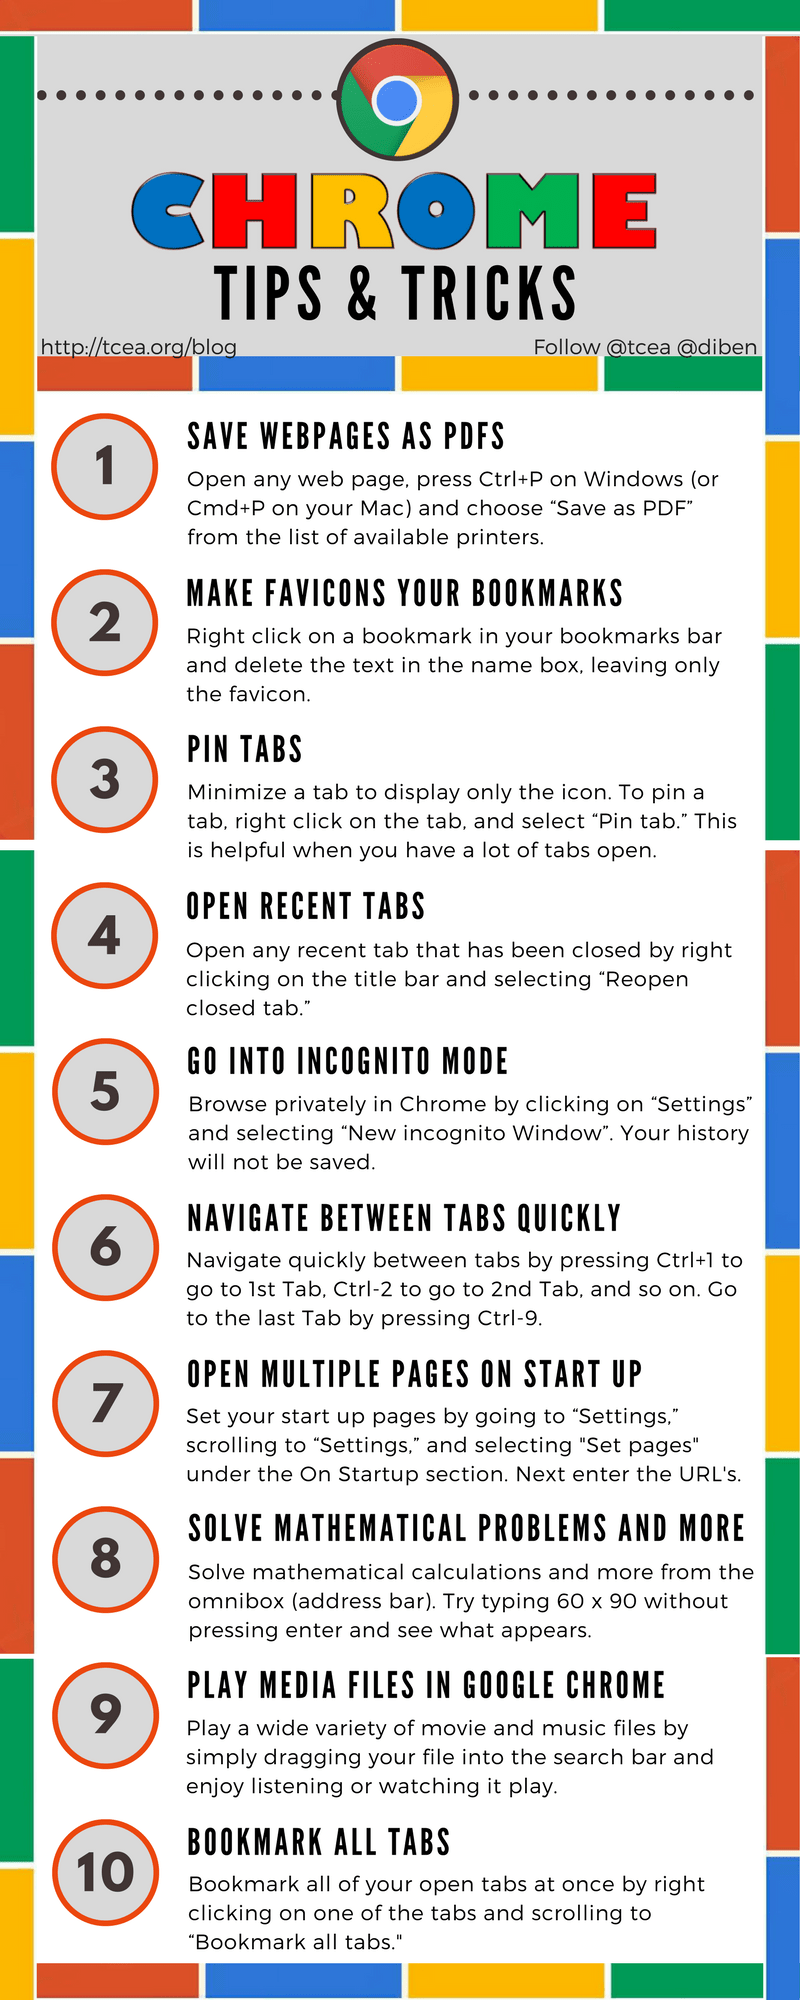 Chrome Tips and Tricks Infographic